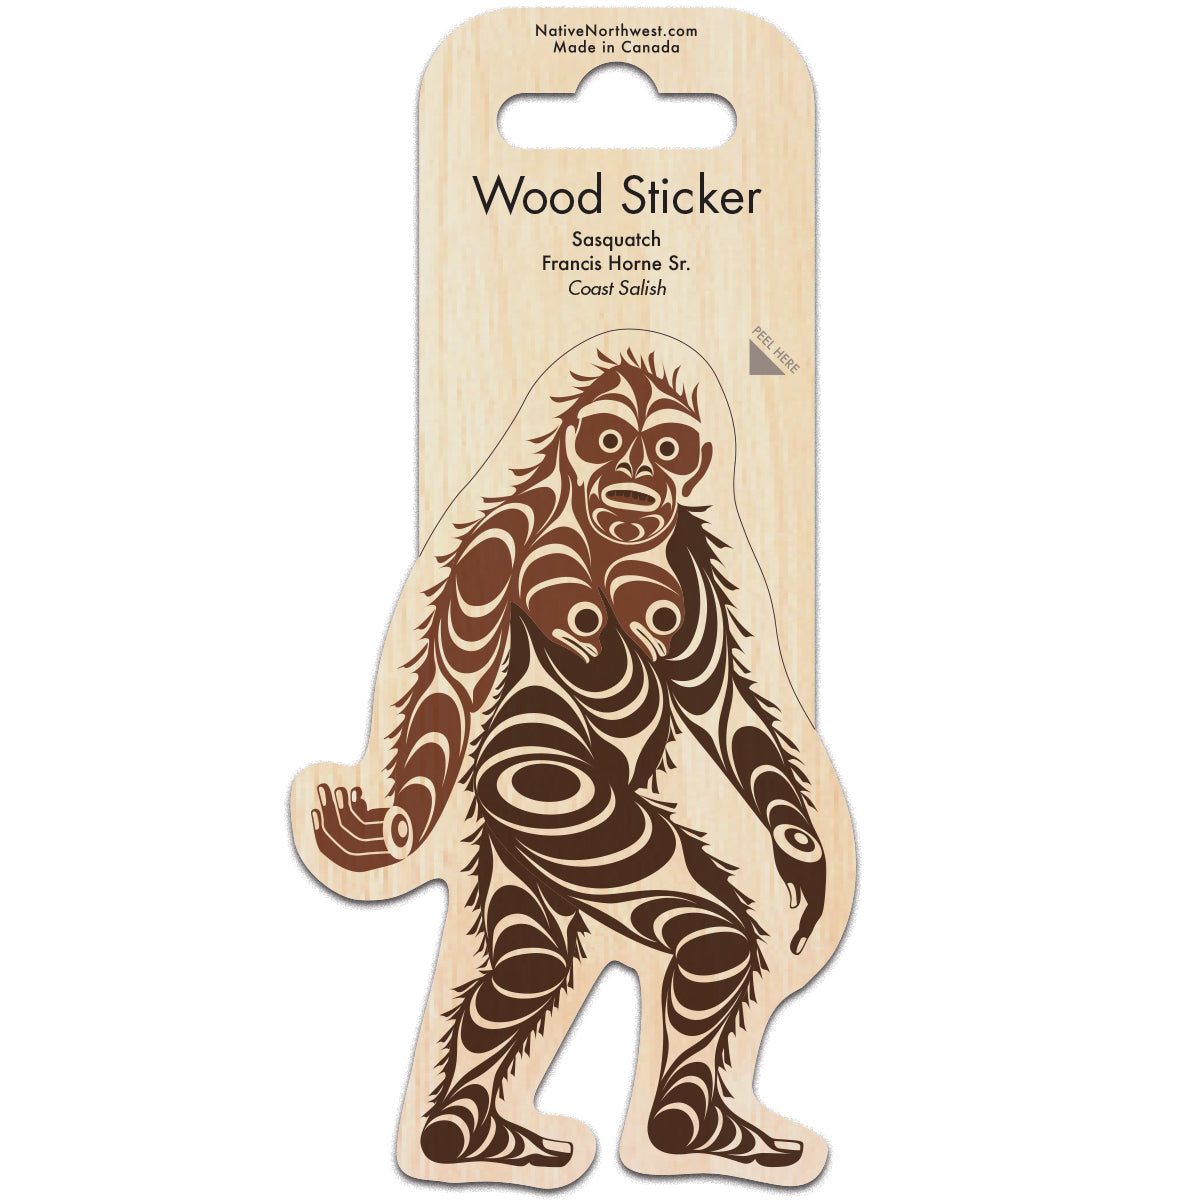 Wood Sticker Sasquatch - Wood Sticker Sasquatch -  - House of Himwitsa Native Art Gallery and Gifts